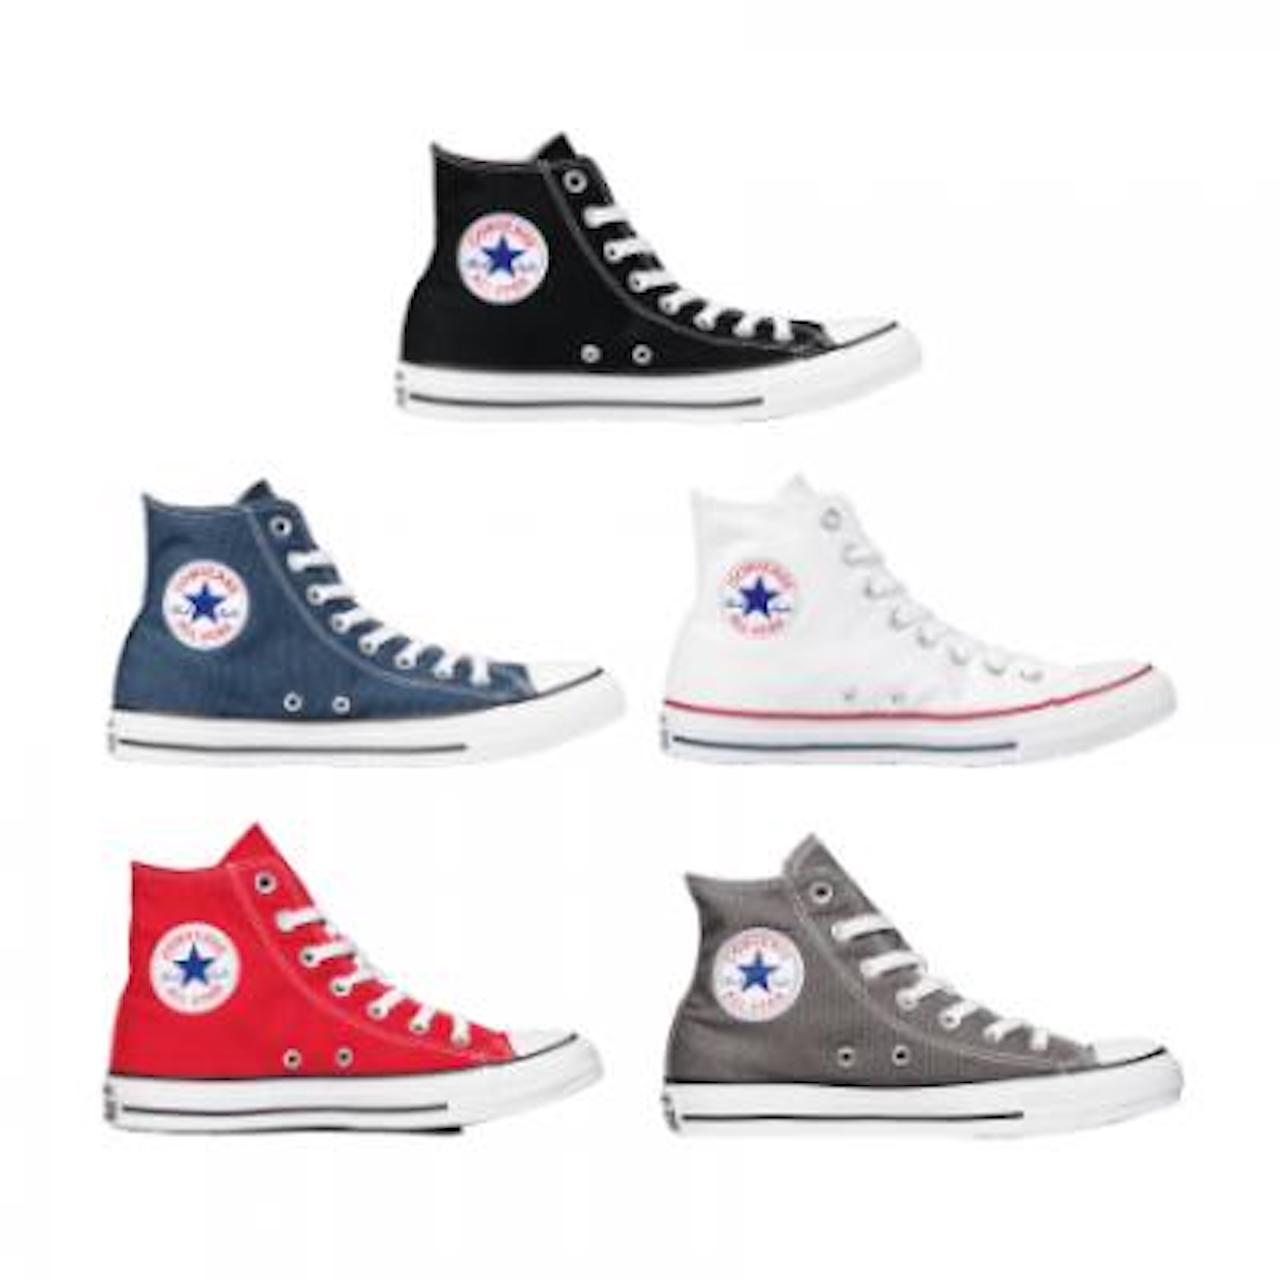 Buy > cheap converse shoes wholesale > in stock